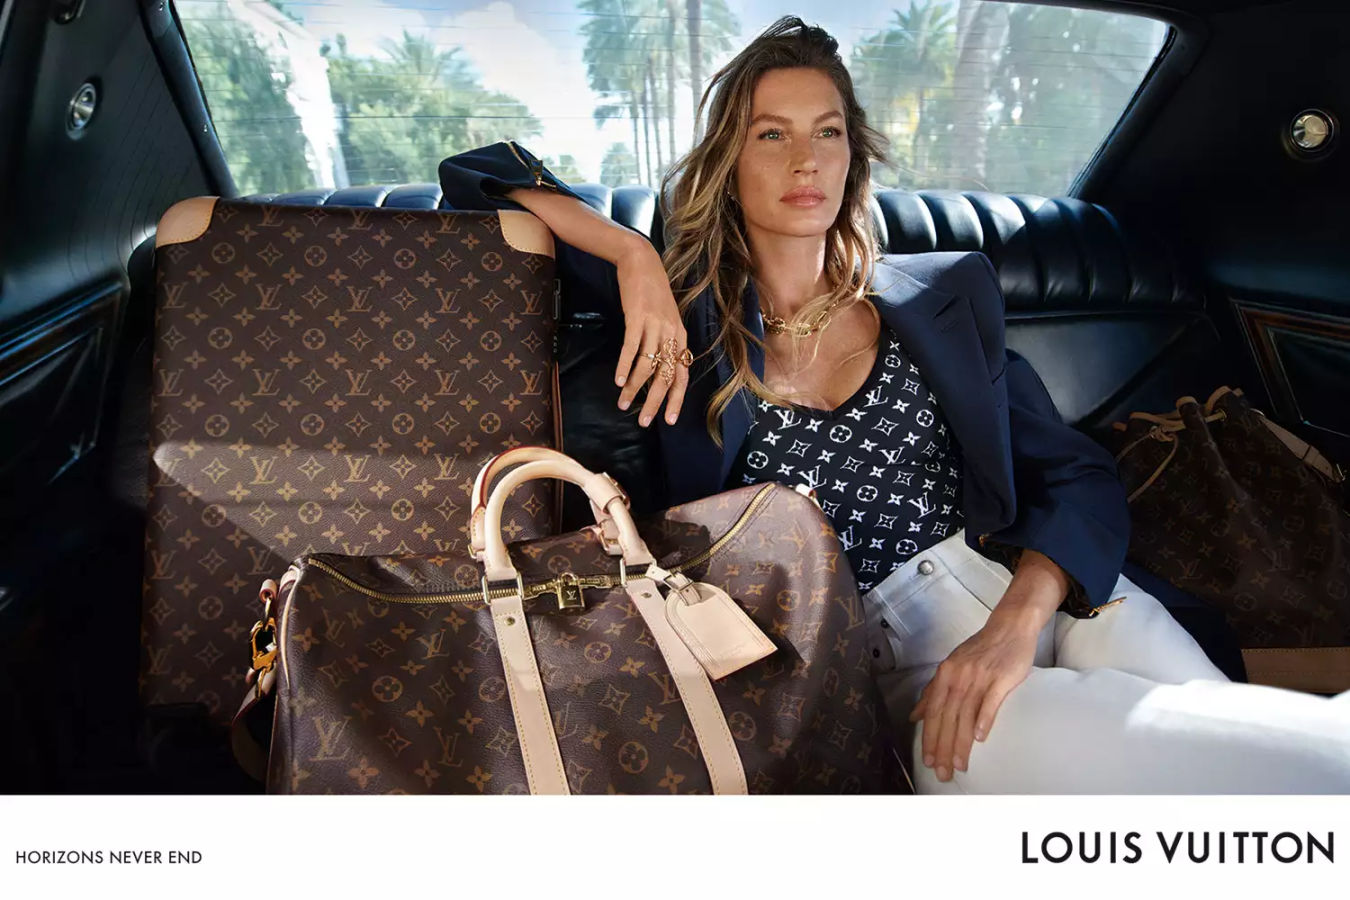 Louis Vuitton launches supermodels ads for new collection